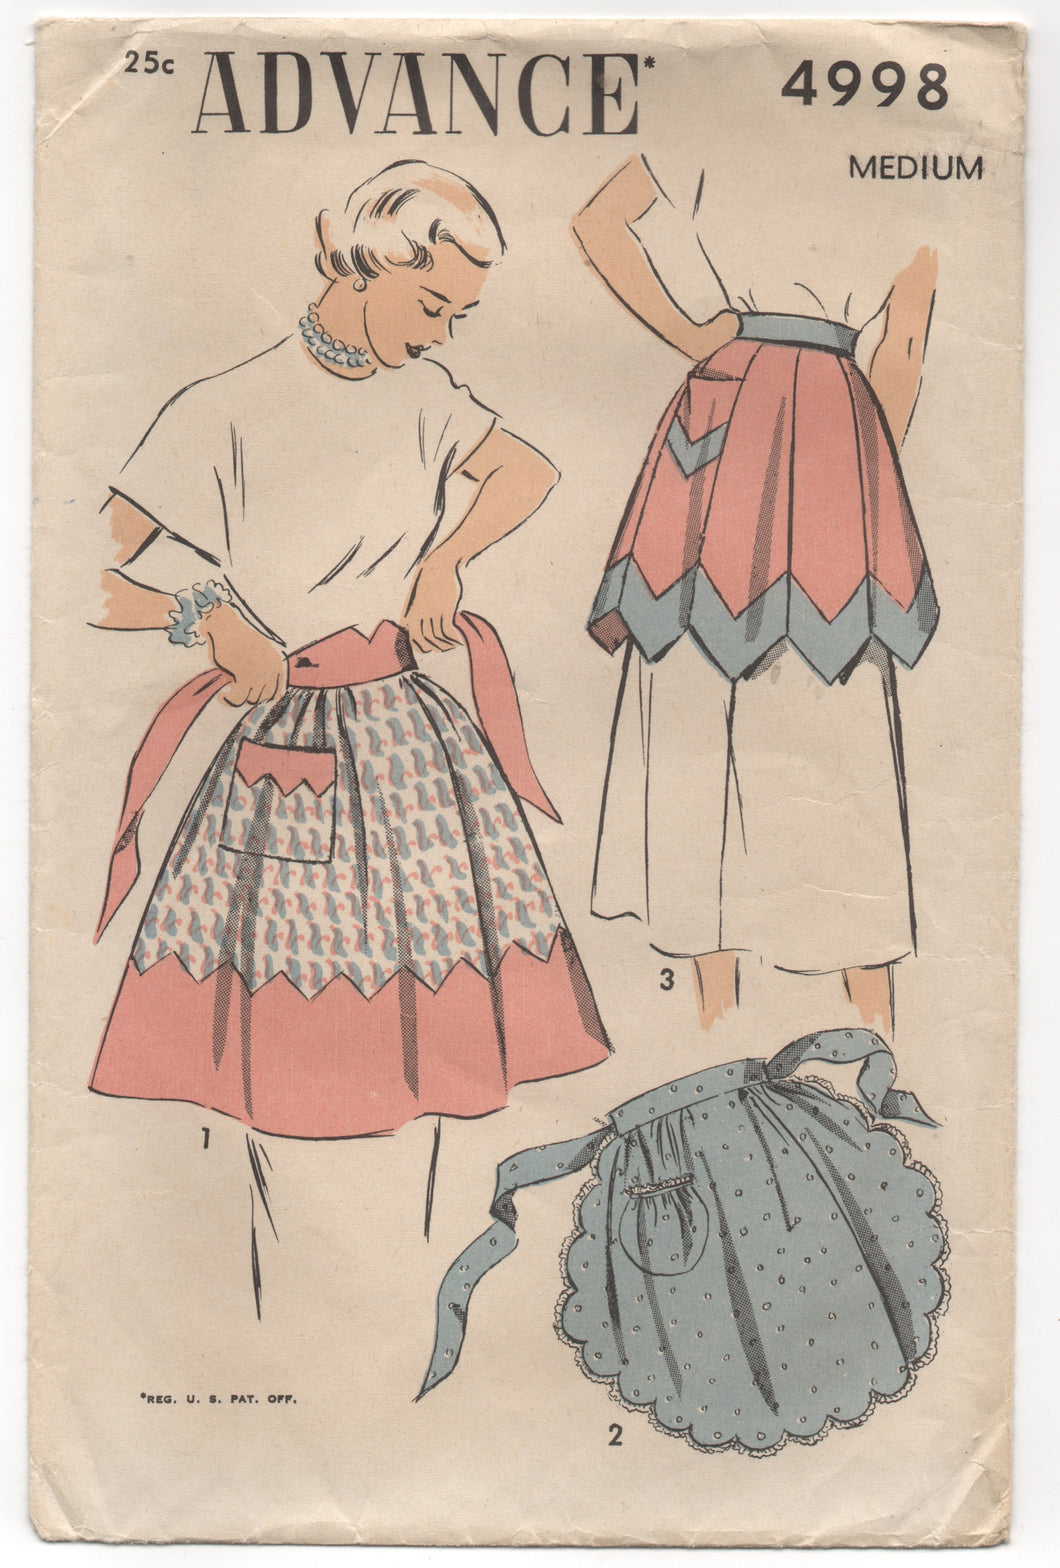 1940's Advance Scalloped Apron, Gored Apron or Apron with Contrasting Band Pattern - Waist 28-30